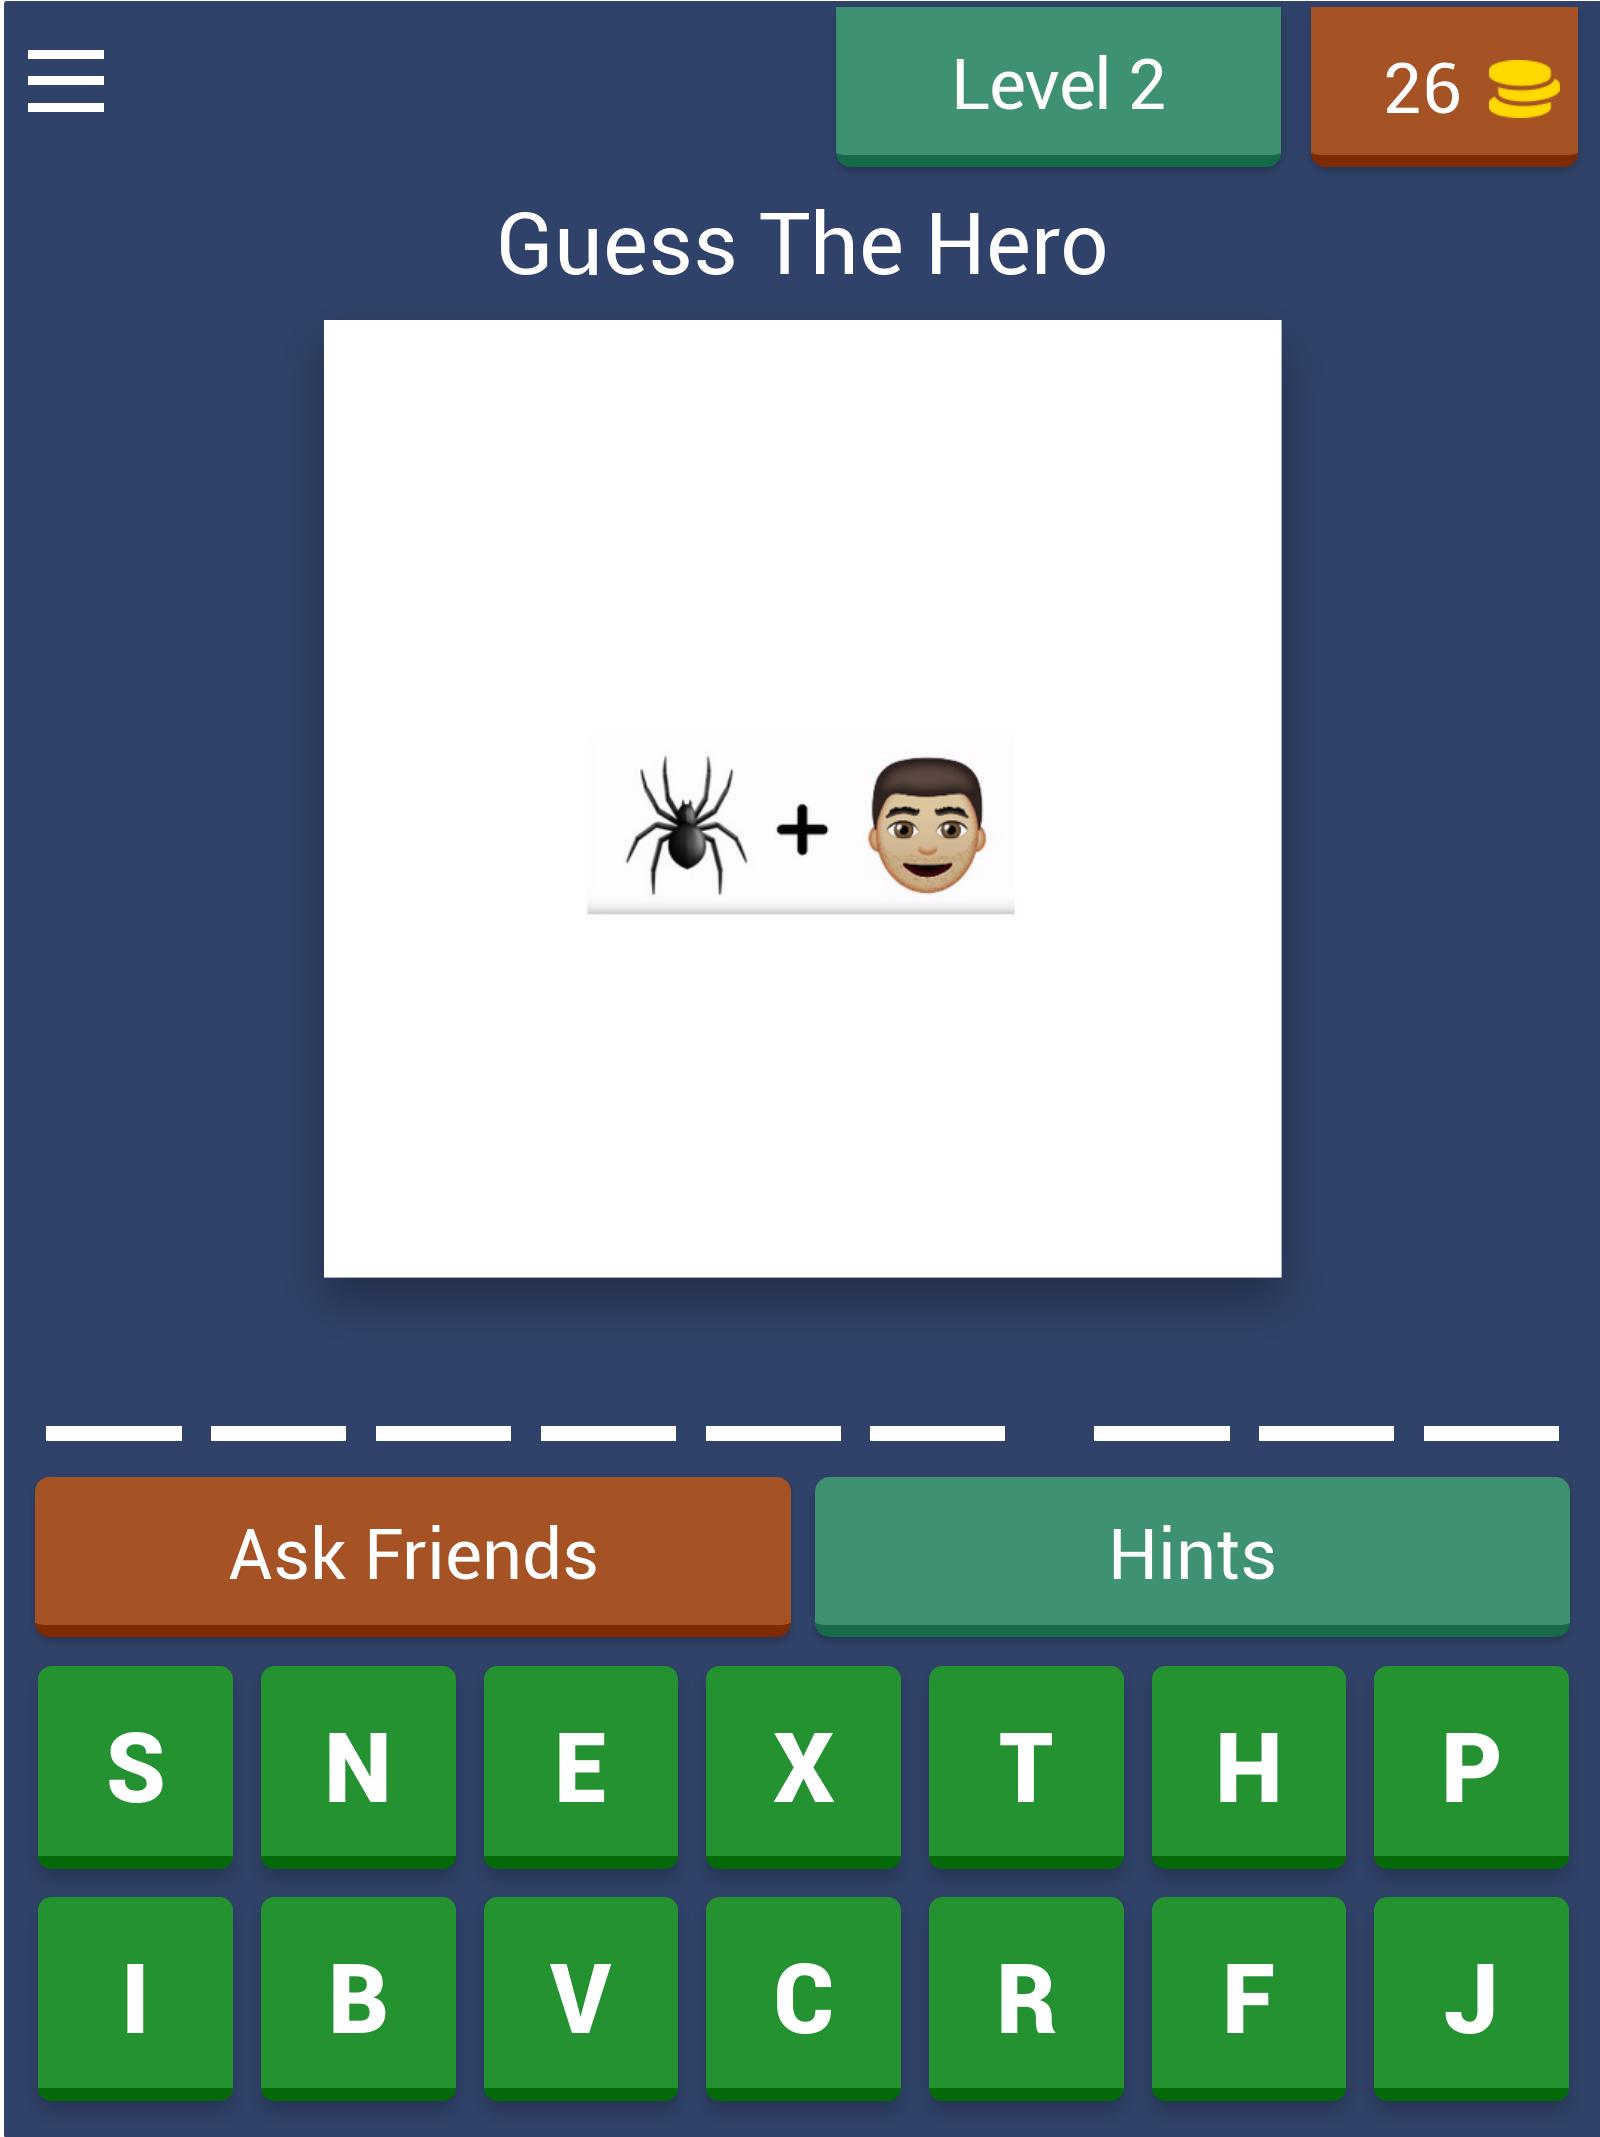 Guess The Marvel Hero By Emoji for Android - APK Download